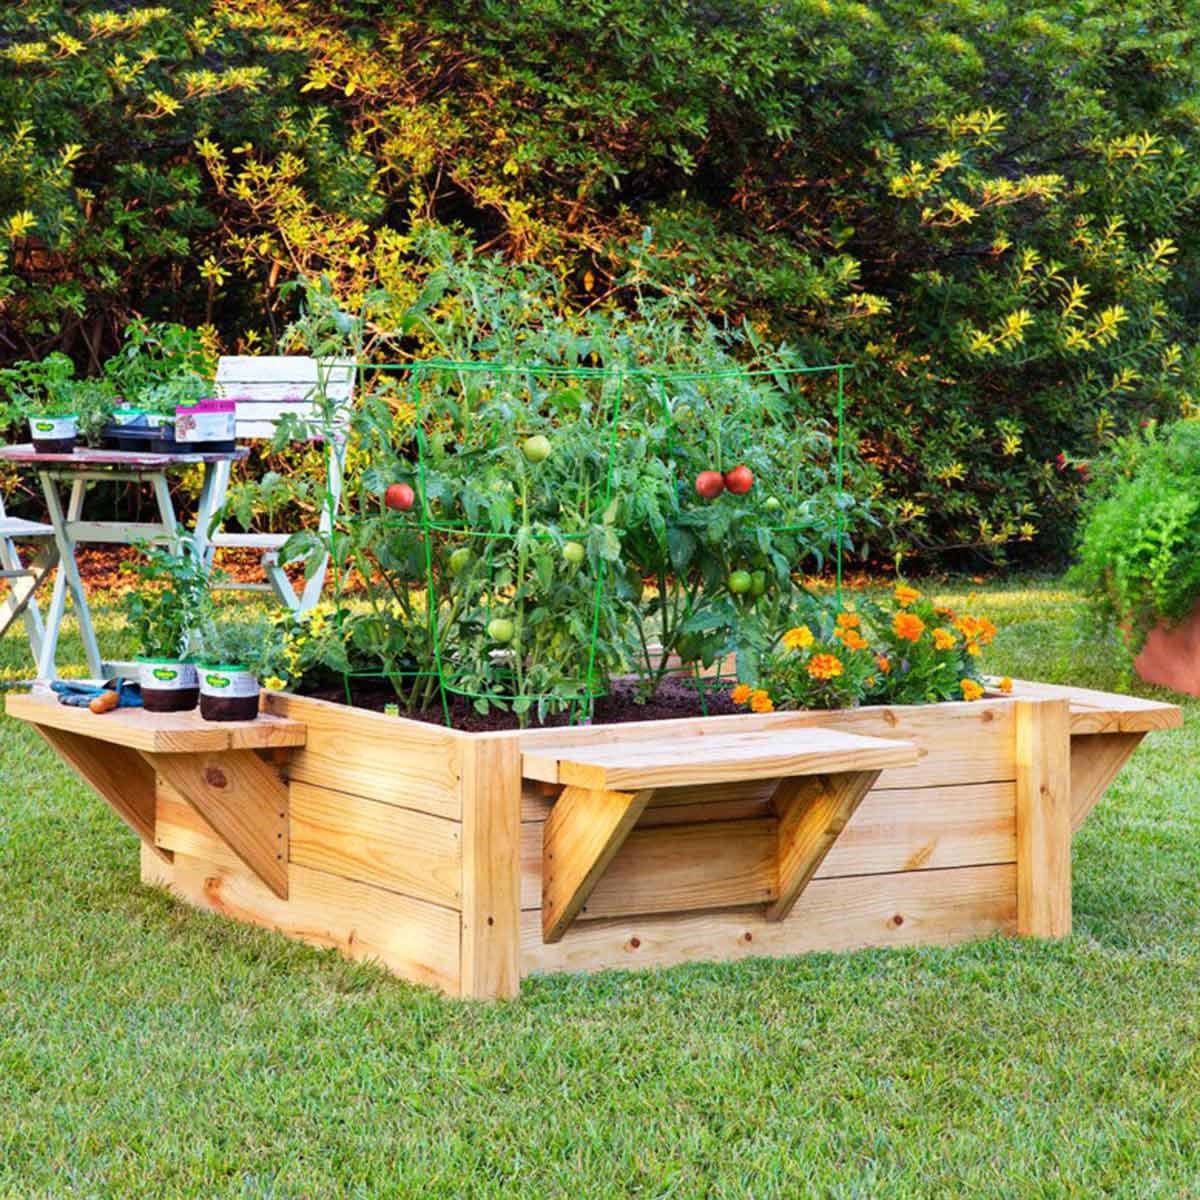 How to Protect an Outdoor Wooden Planter